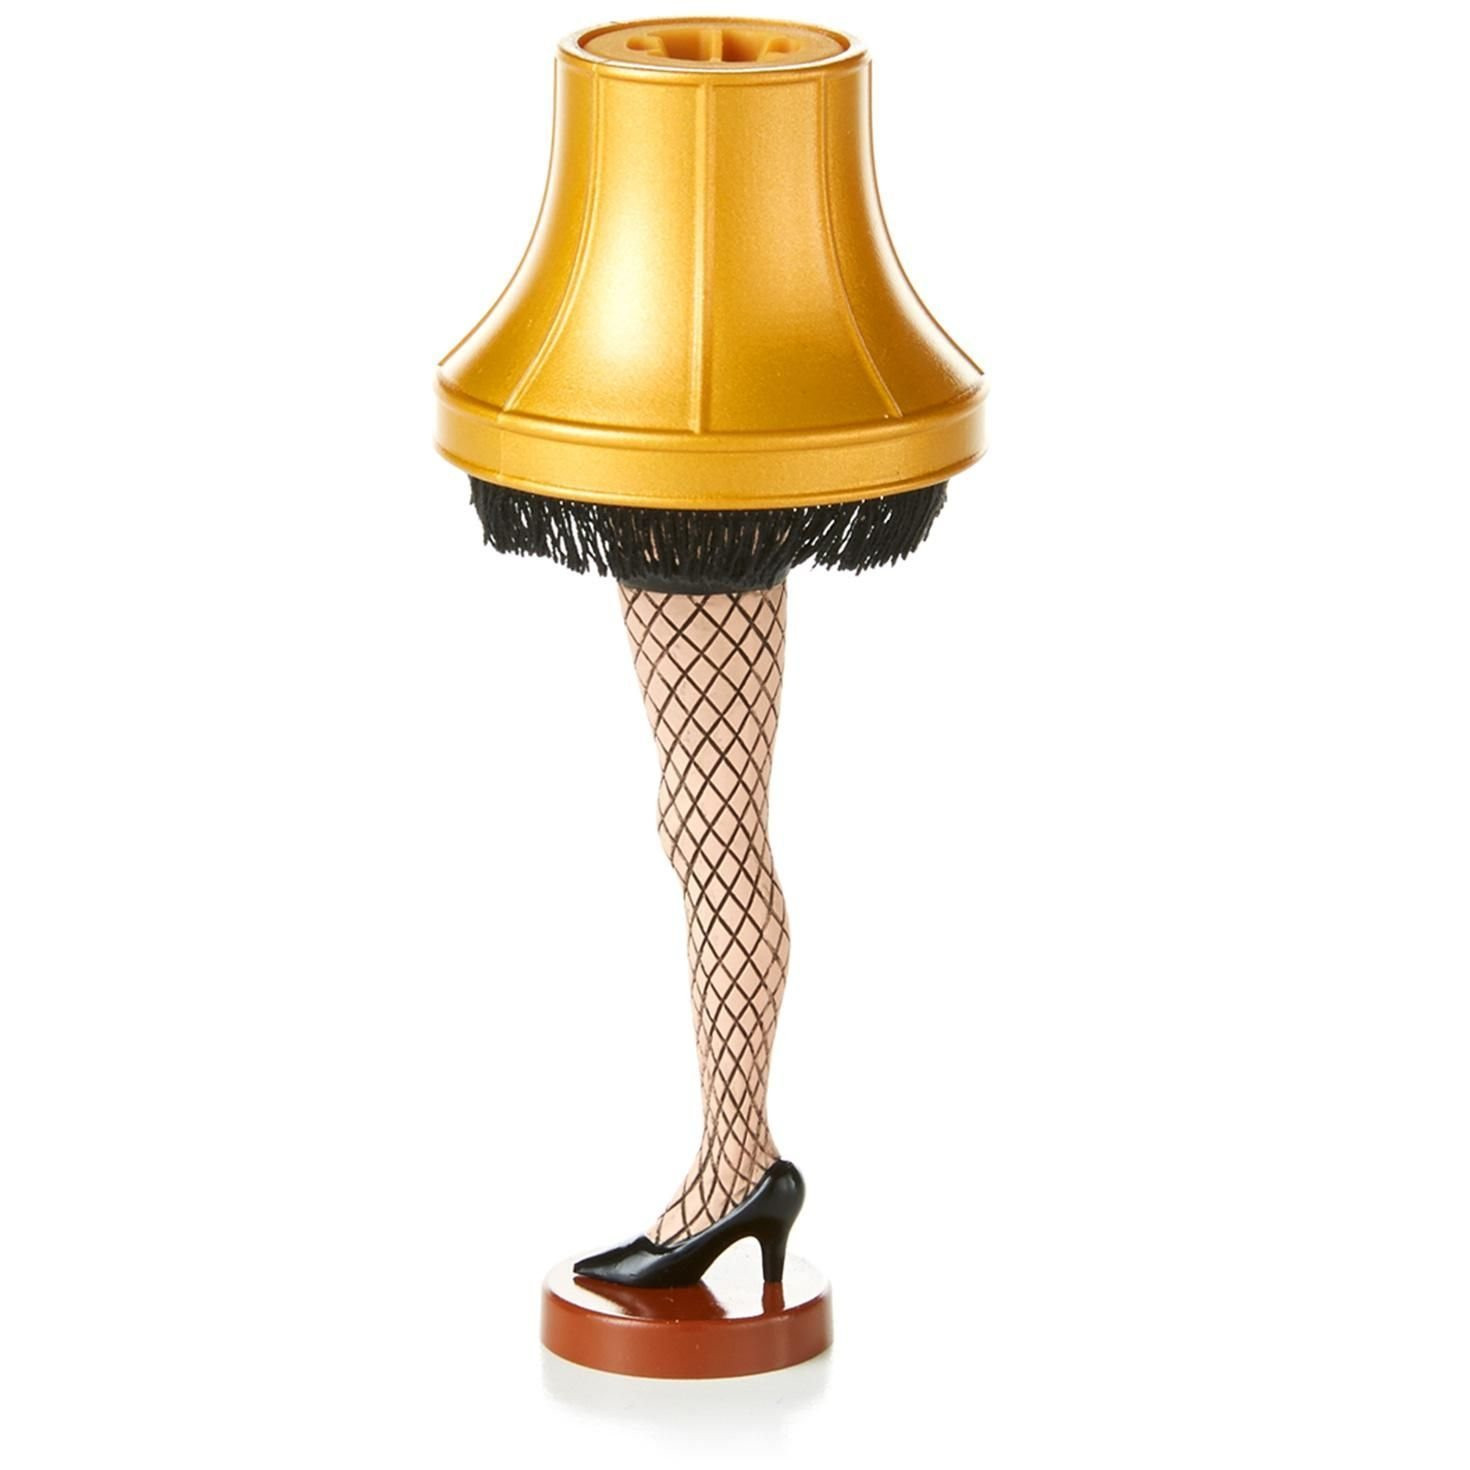 20 Christmas Story Leg Lamp
 15 Last Minute Gifts for Under $20